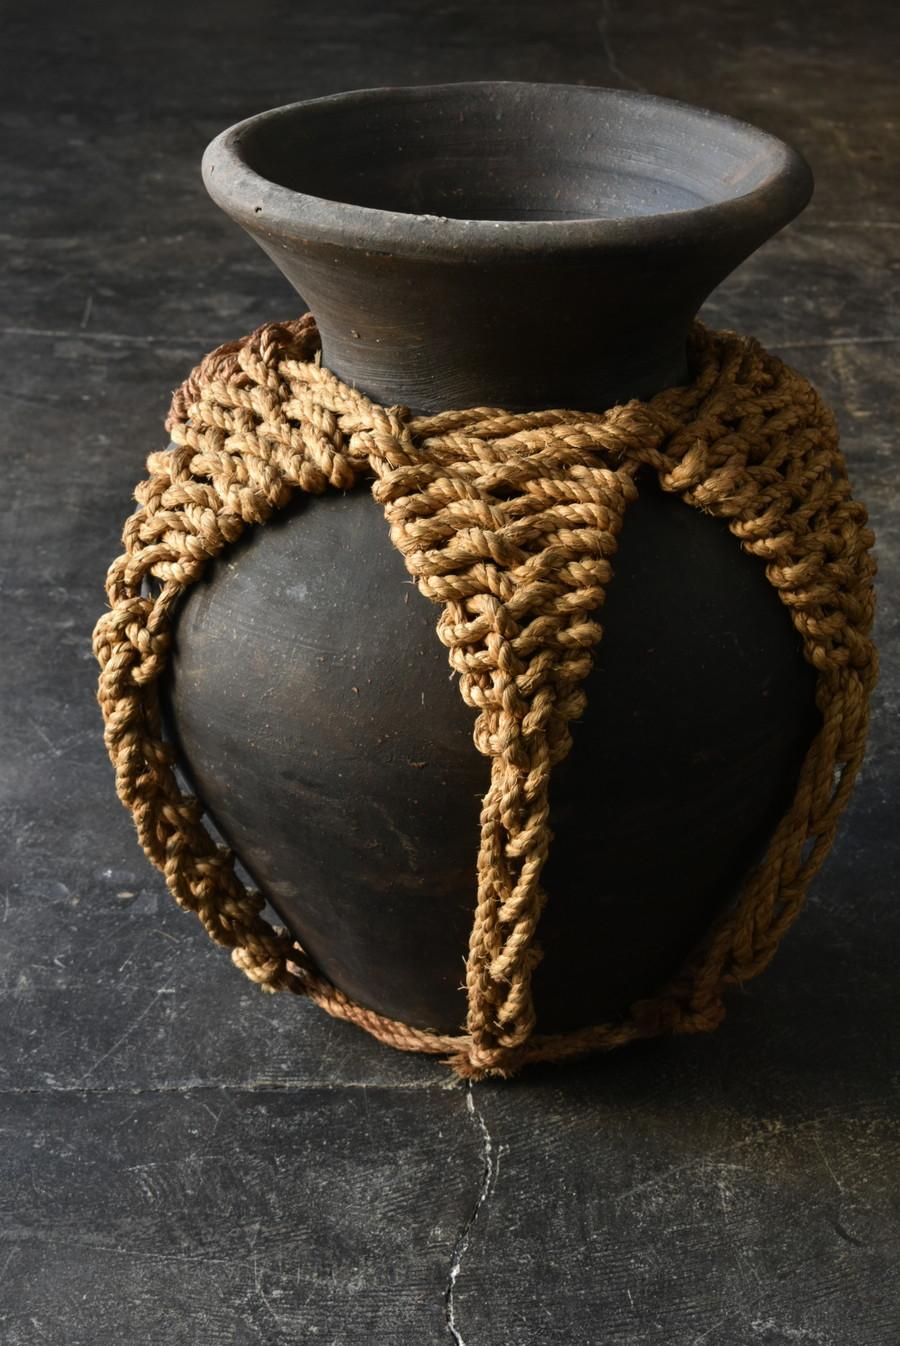 This seems to be an old Korean pottery jar.
In Korea, pots similar to this shape have been made for a long time.
It is thought that this was made by imitating the shape.

And it is this rope that is most attractive.
It is decorative and in